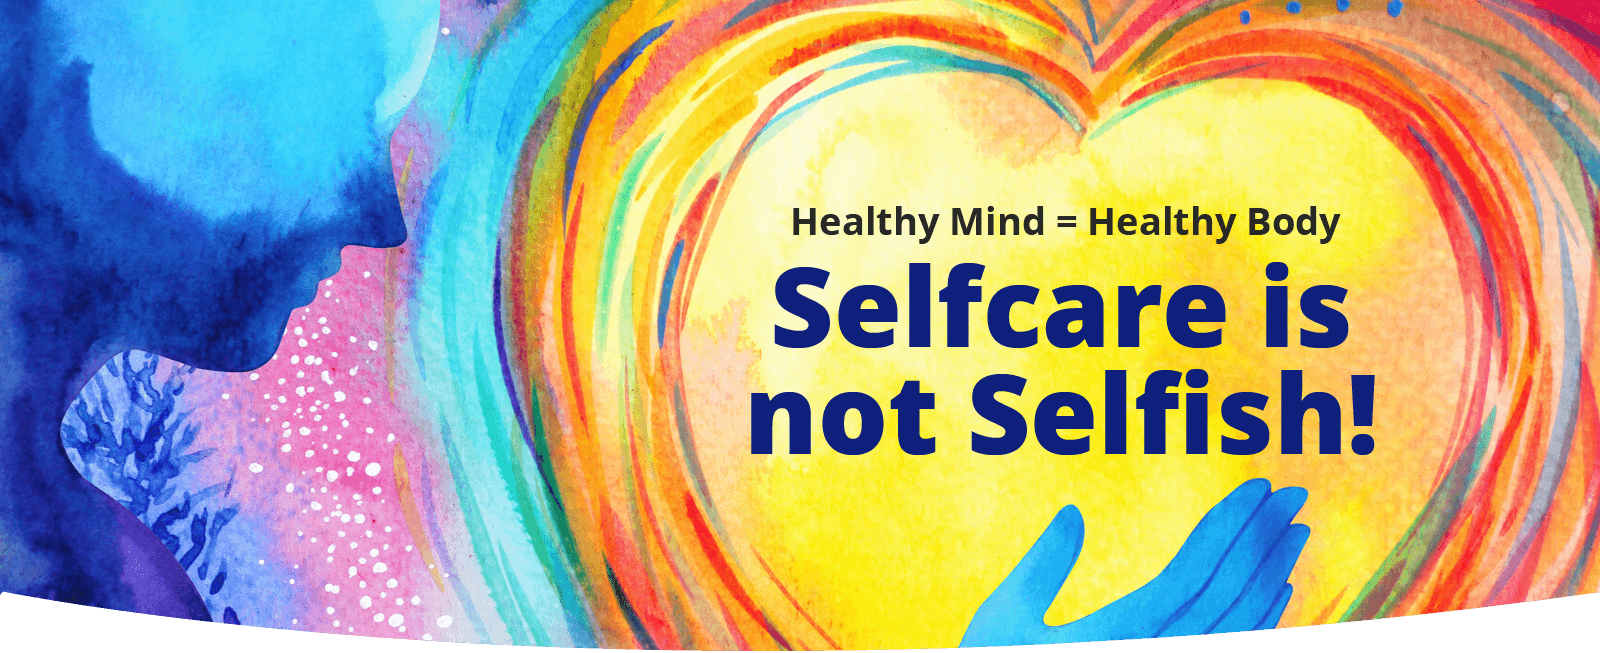 Selfcare is not Selfish!